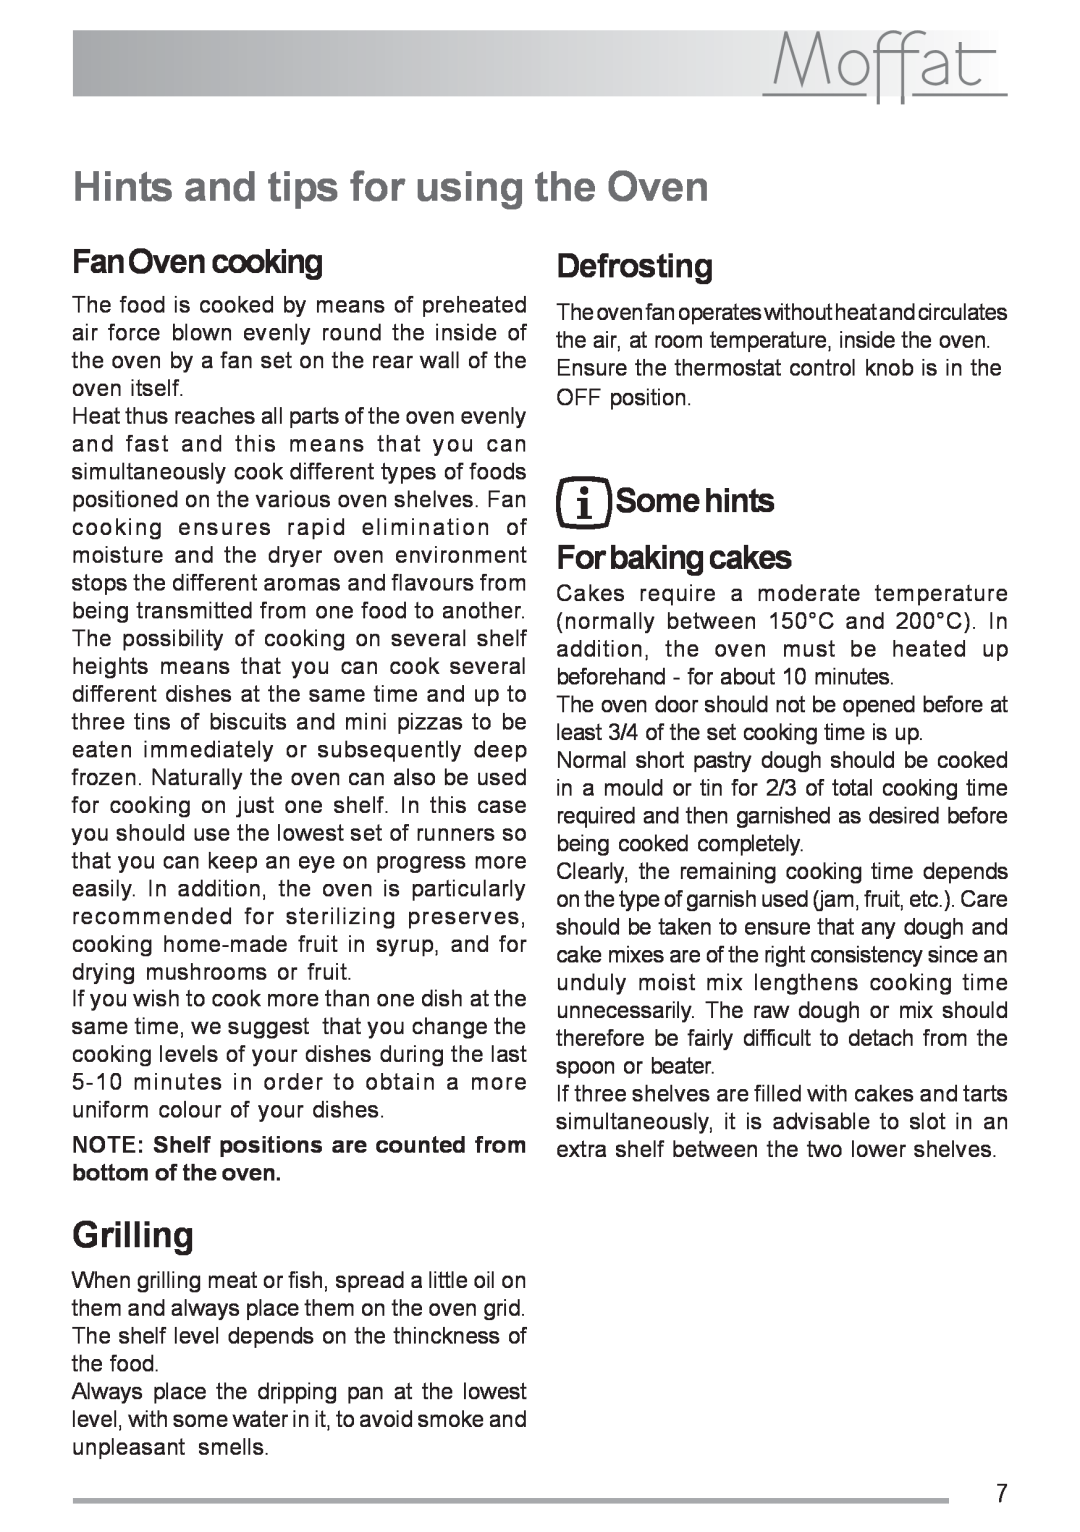 Moffat MSF 611 manual Hints and tips for using the Oven, Grilling, FanOven cooking, Defrosting, Somehints Forbakingcakes 